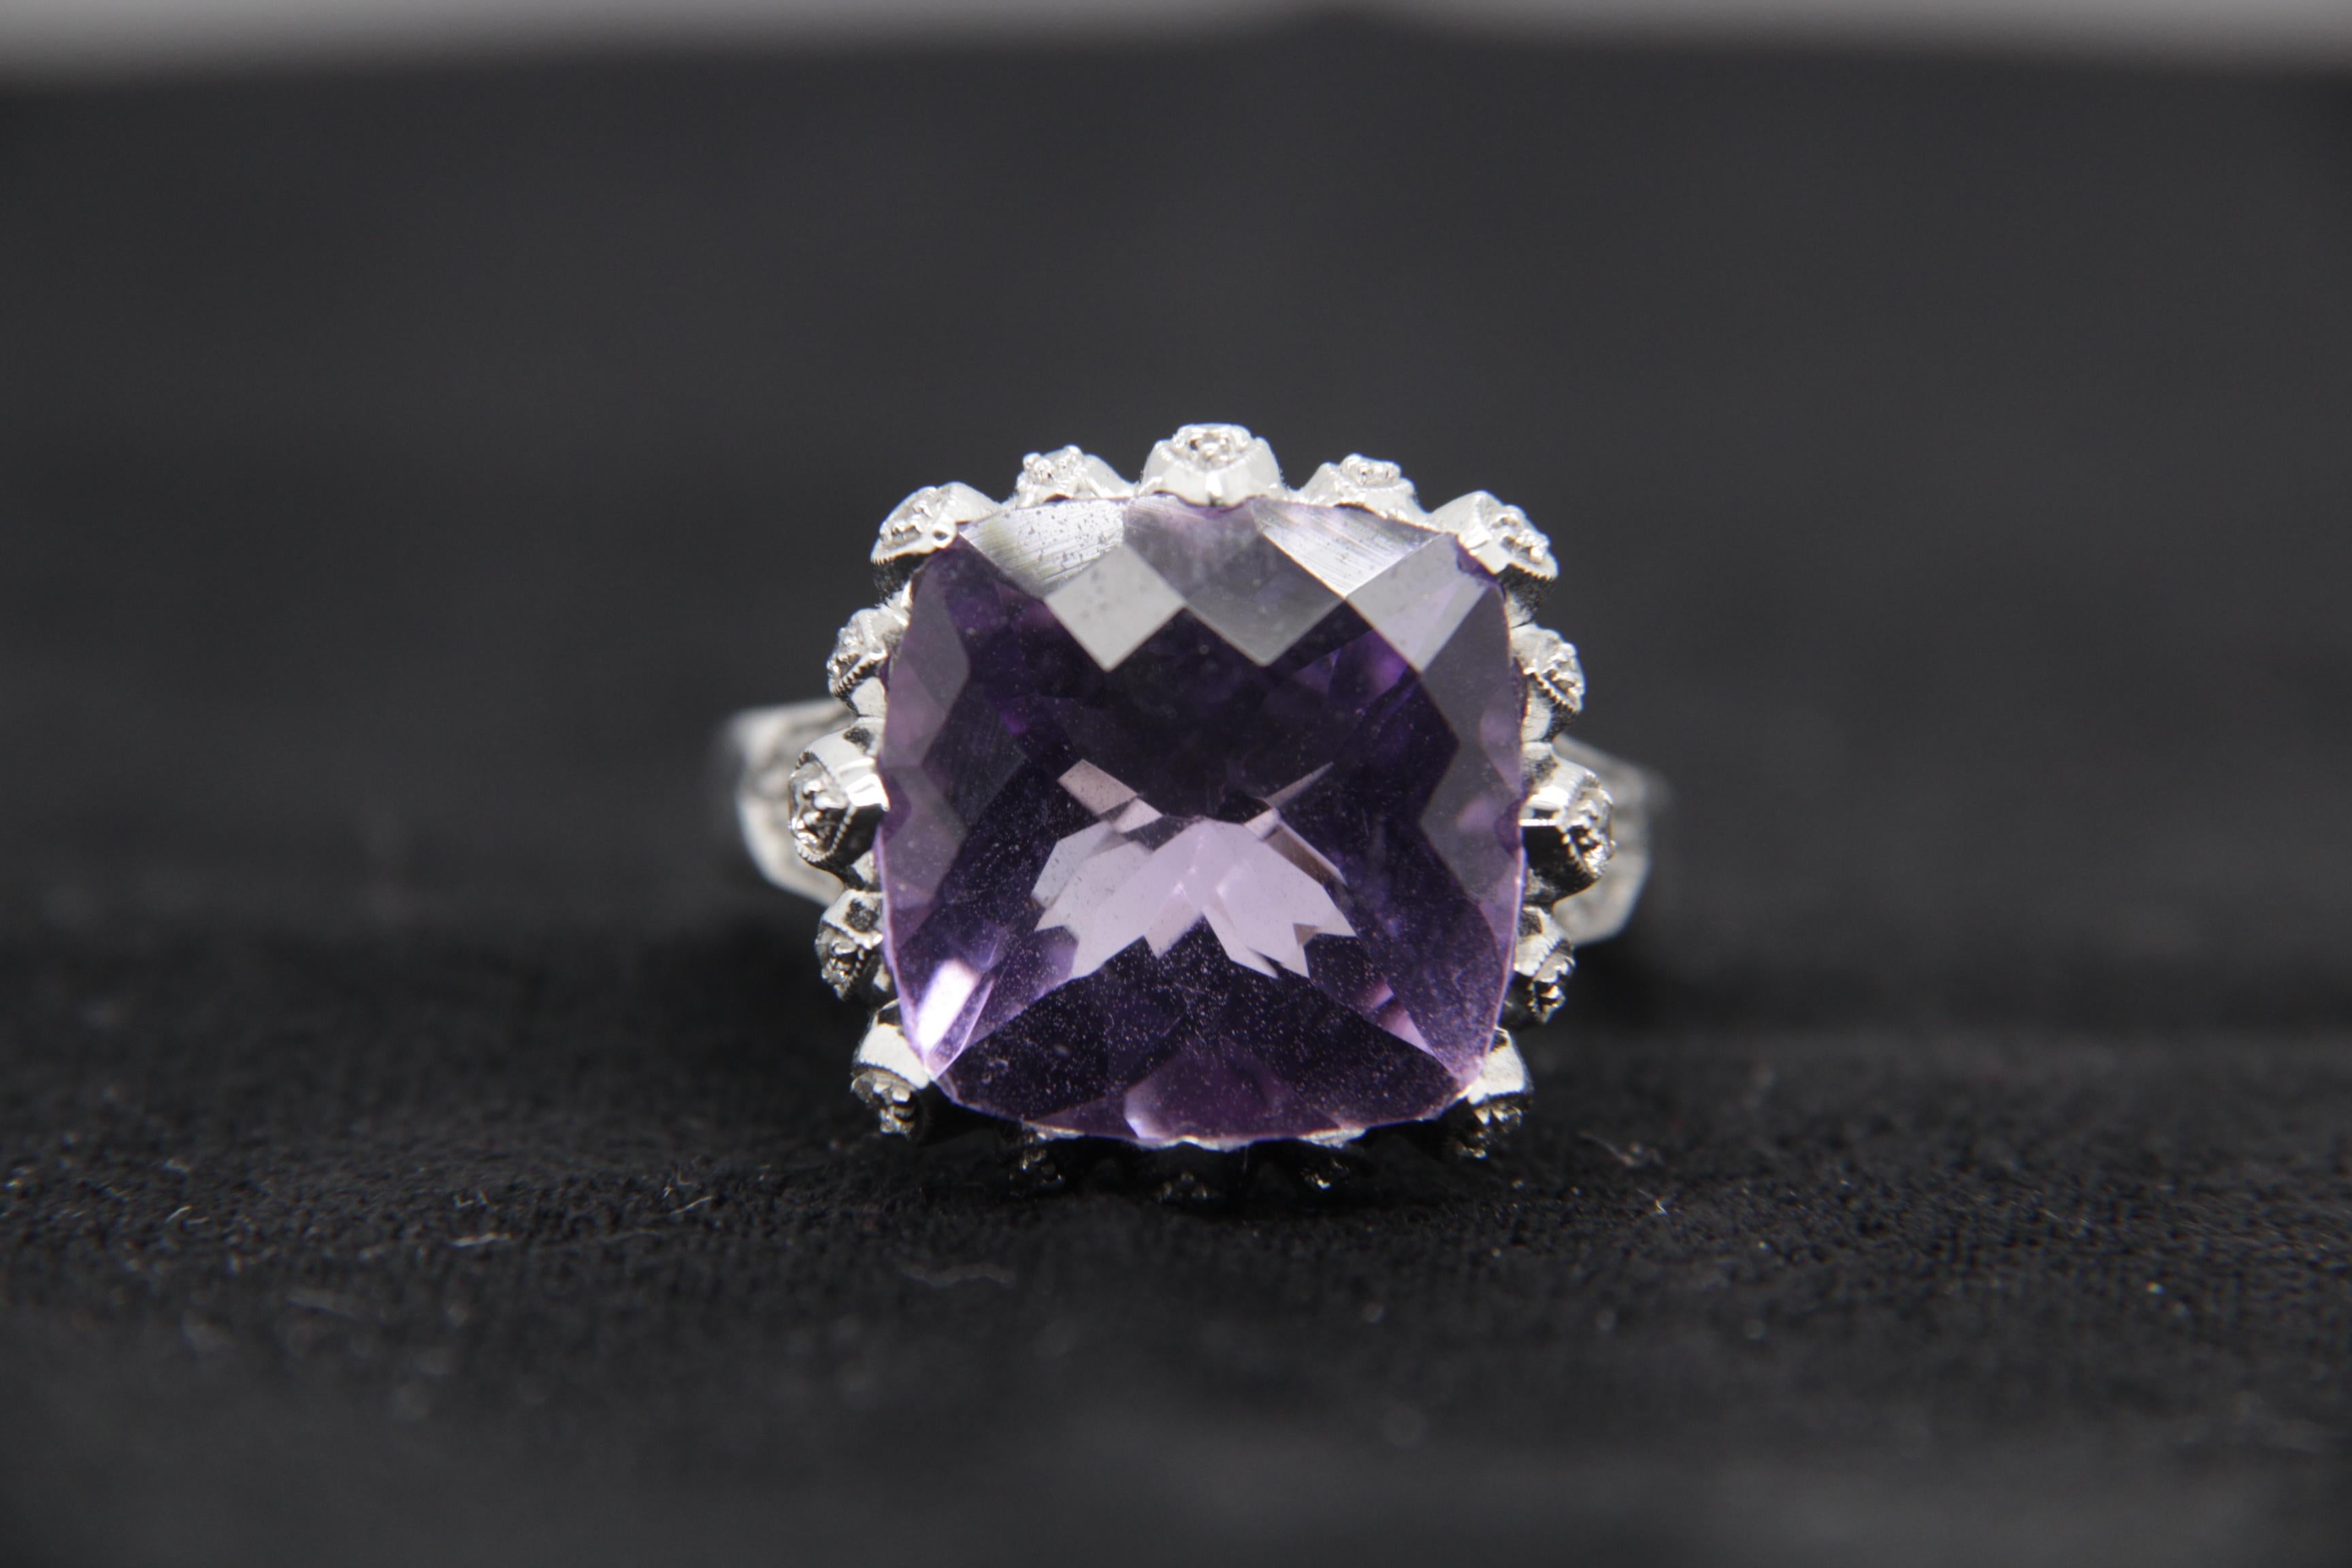 A brand new amethyst and diamond ring in 18 karat gold. The total amethyst weight is 7.70 carats and diamond weight is 0.32 carats. The total ring weight is 9.02 grams.